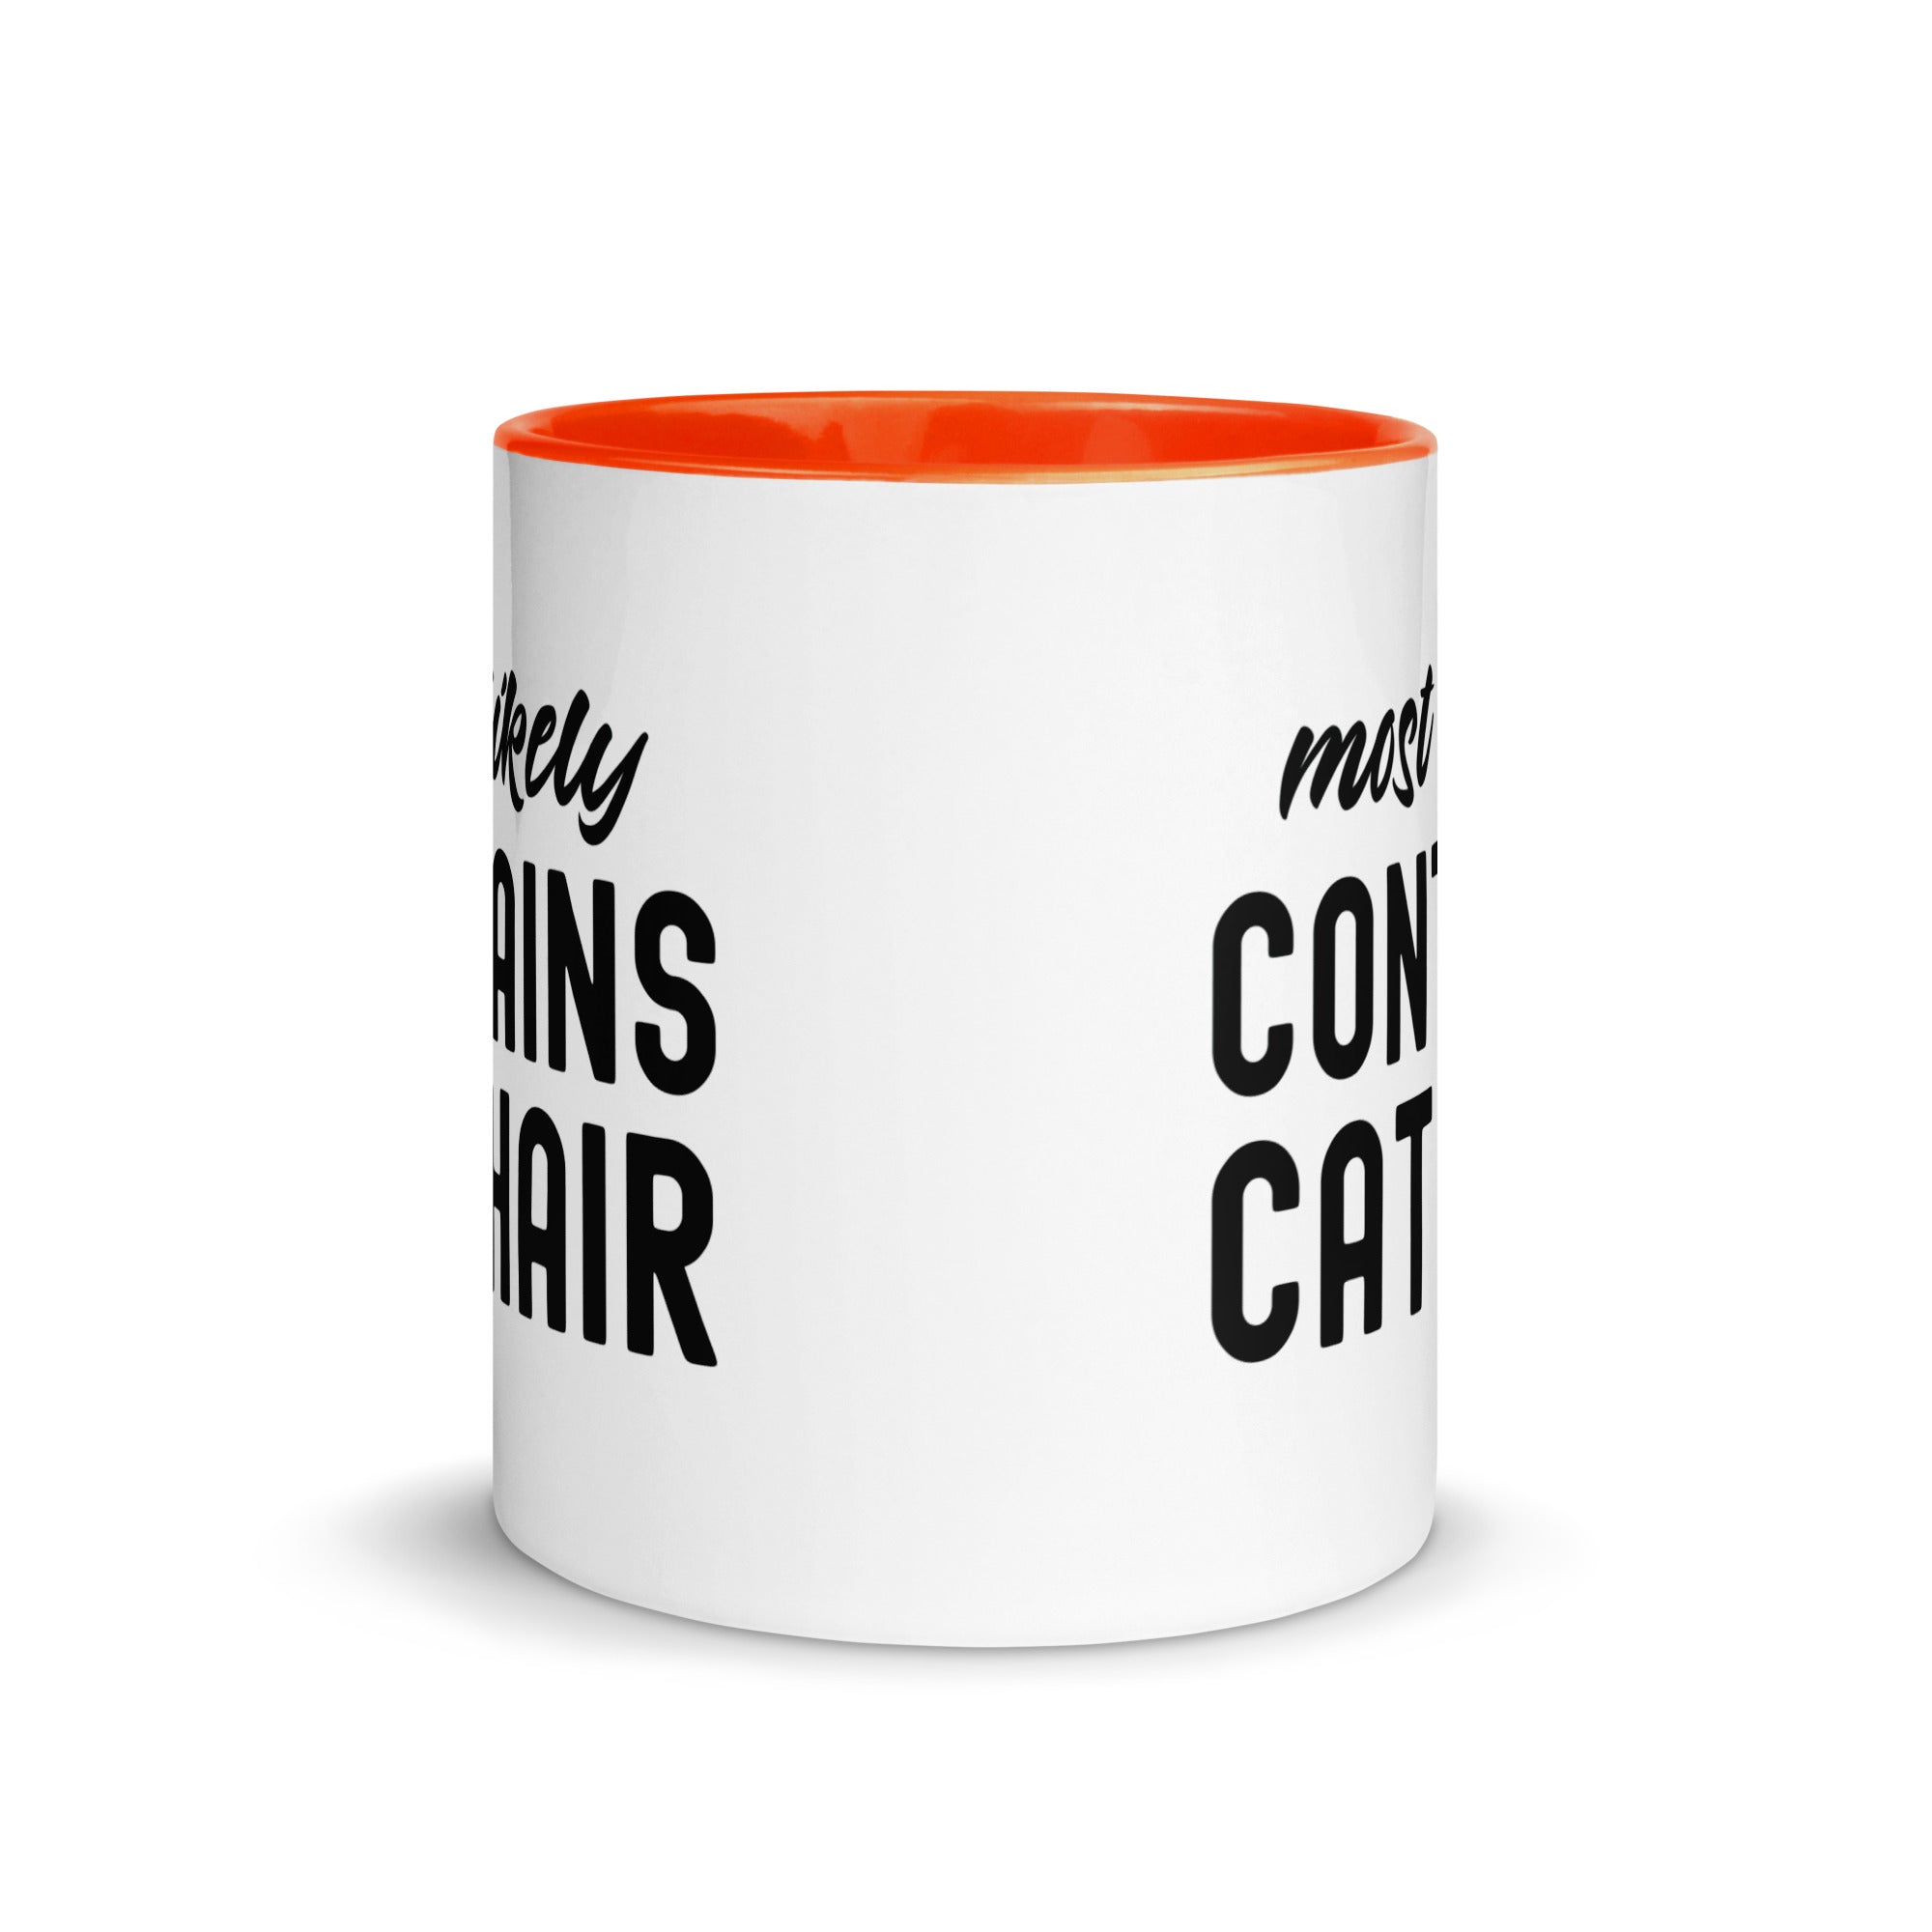 Mug with Color Inside | Most Likely Contains Cat Hair